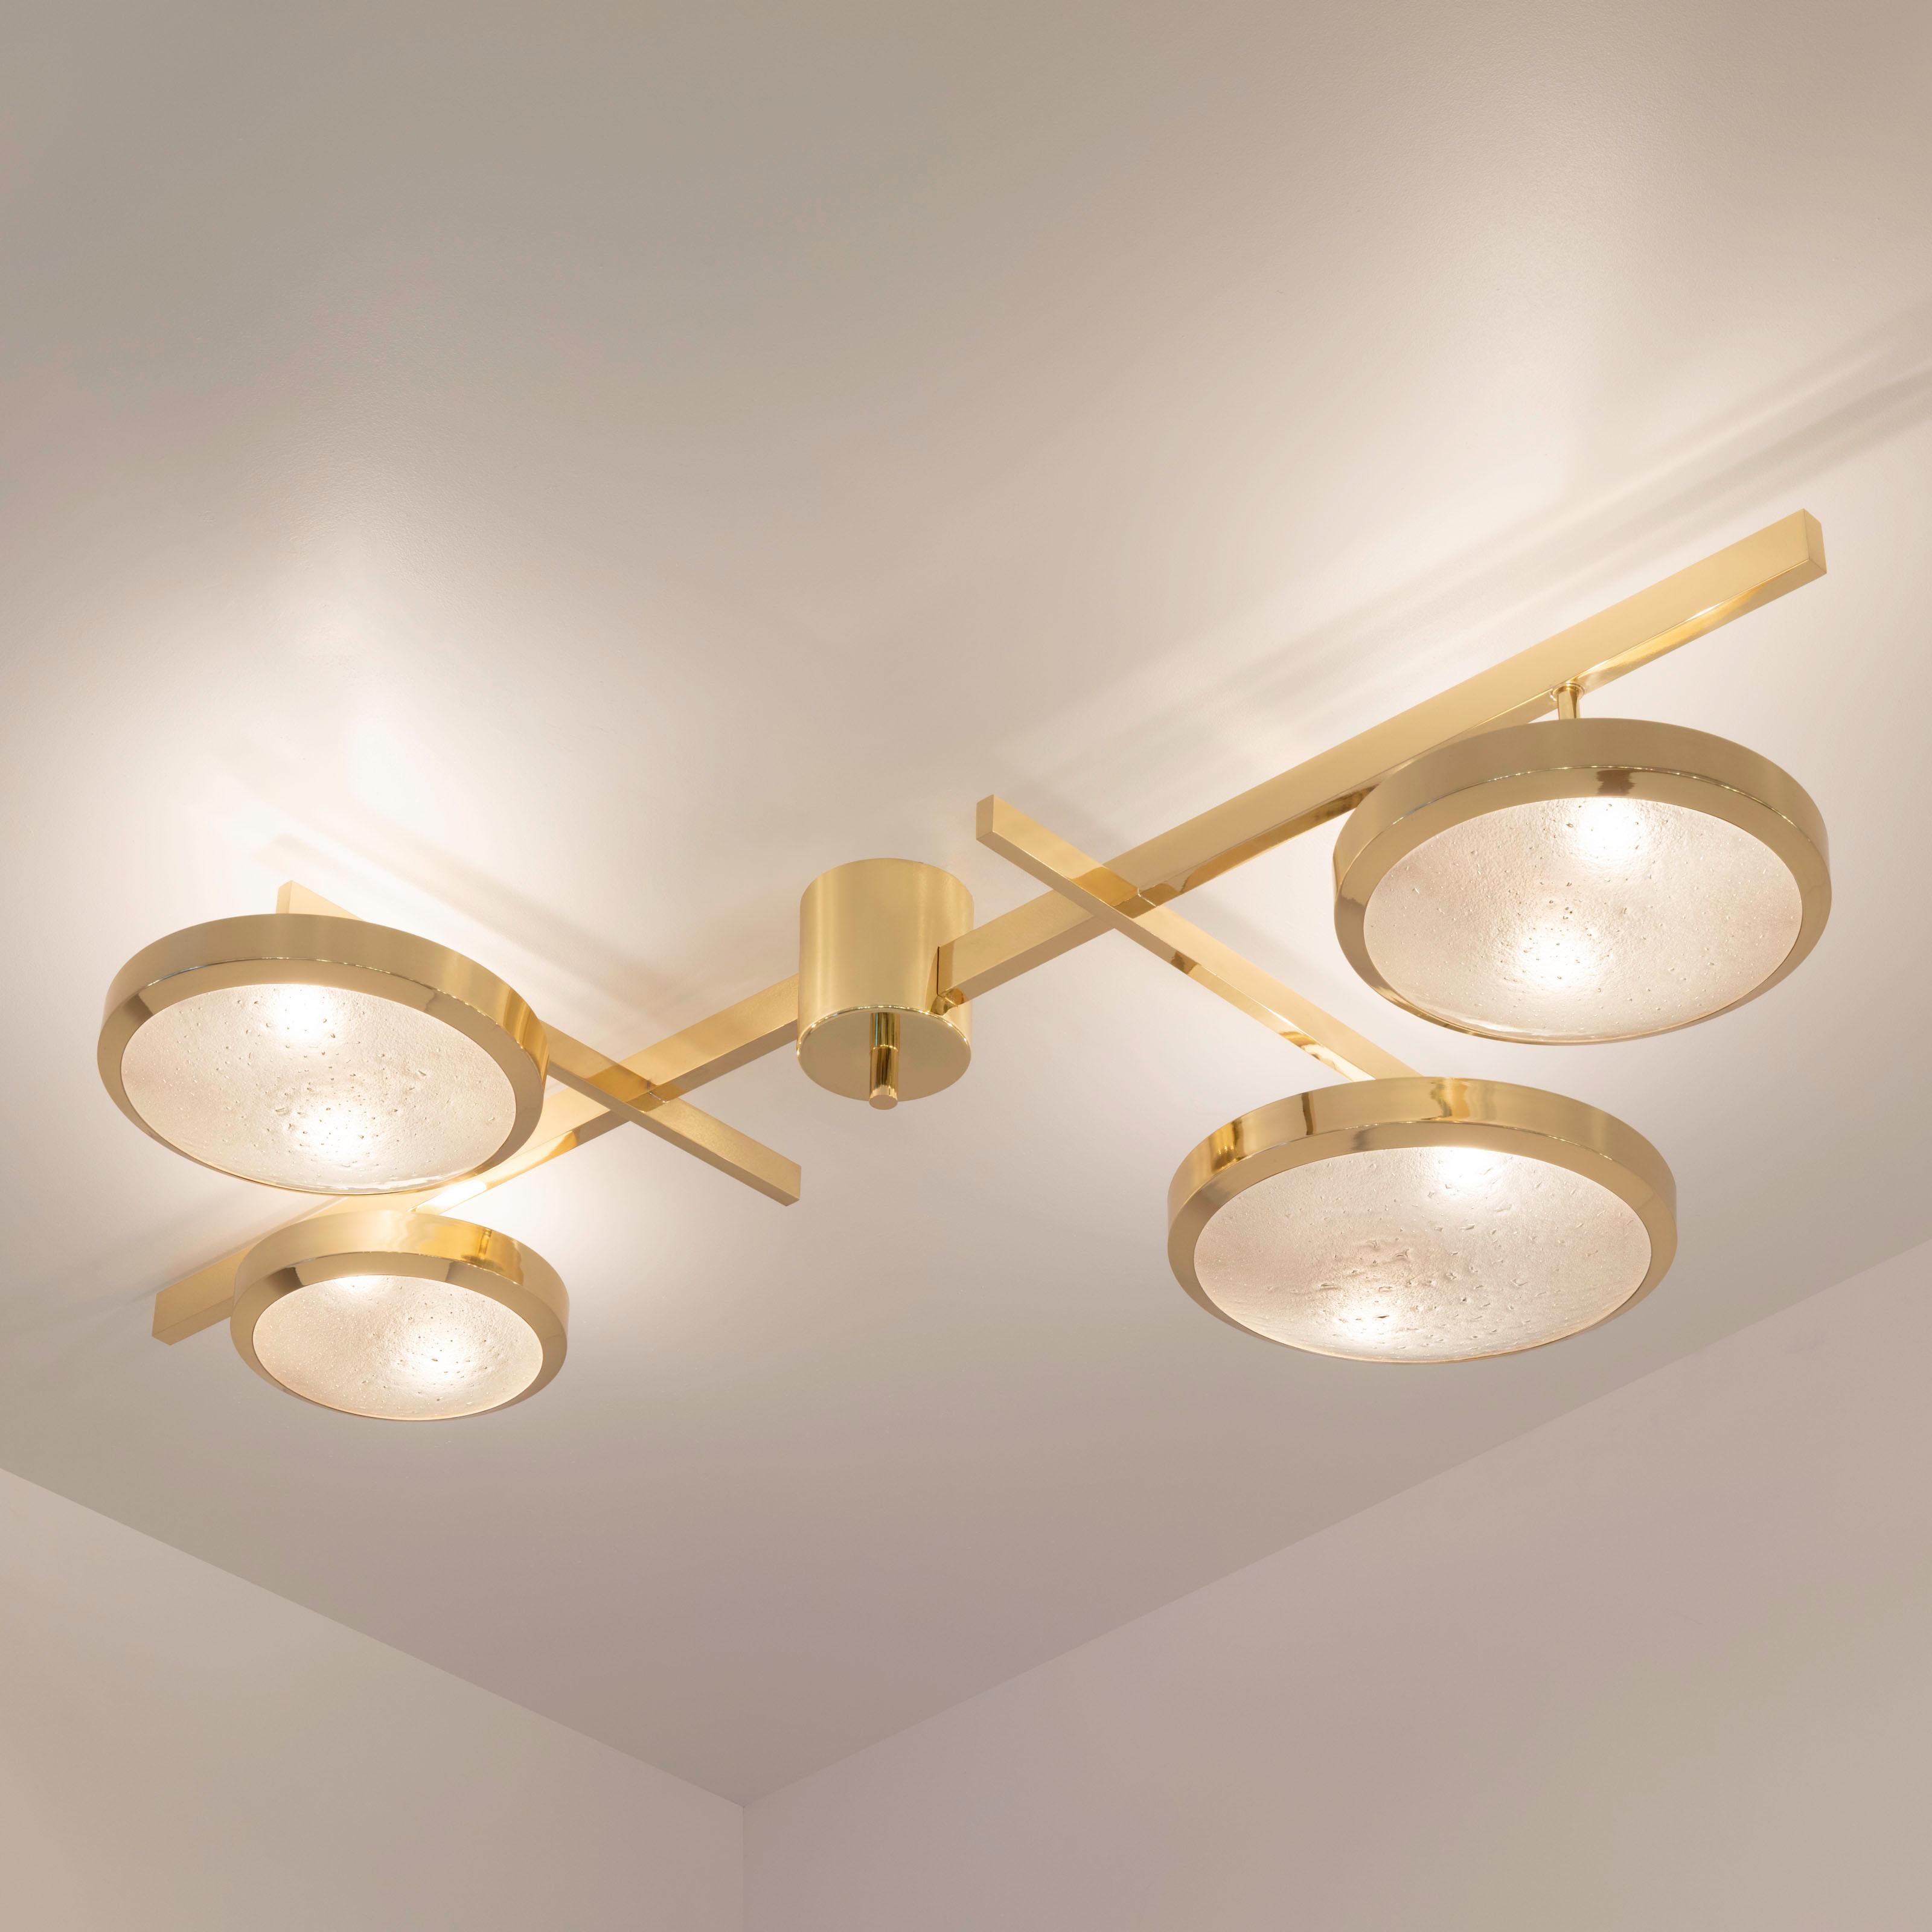 Contemporary Tetrix Ceiling Light by Gaspare Asaro- Satin Nickel Finish For Sale